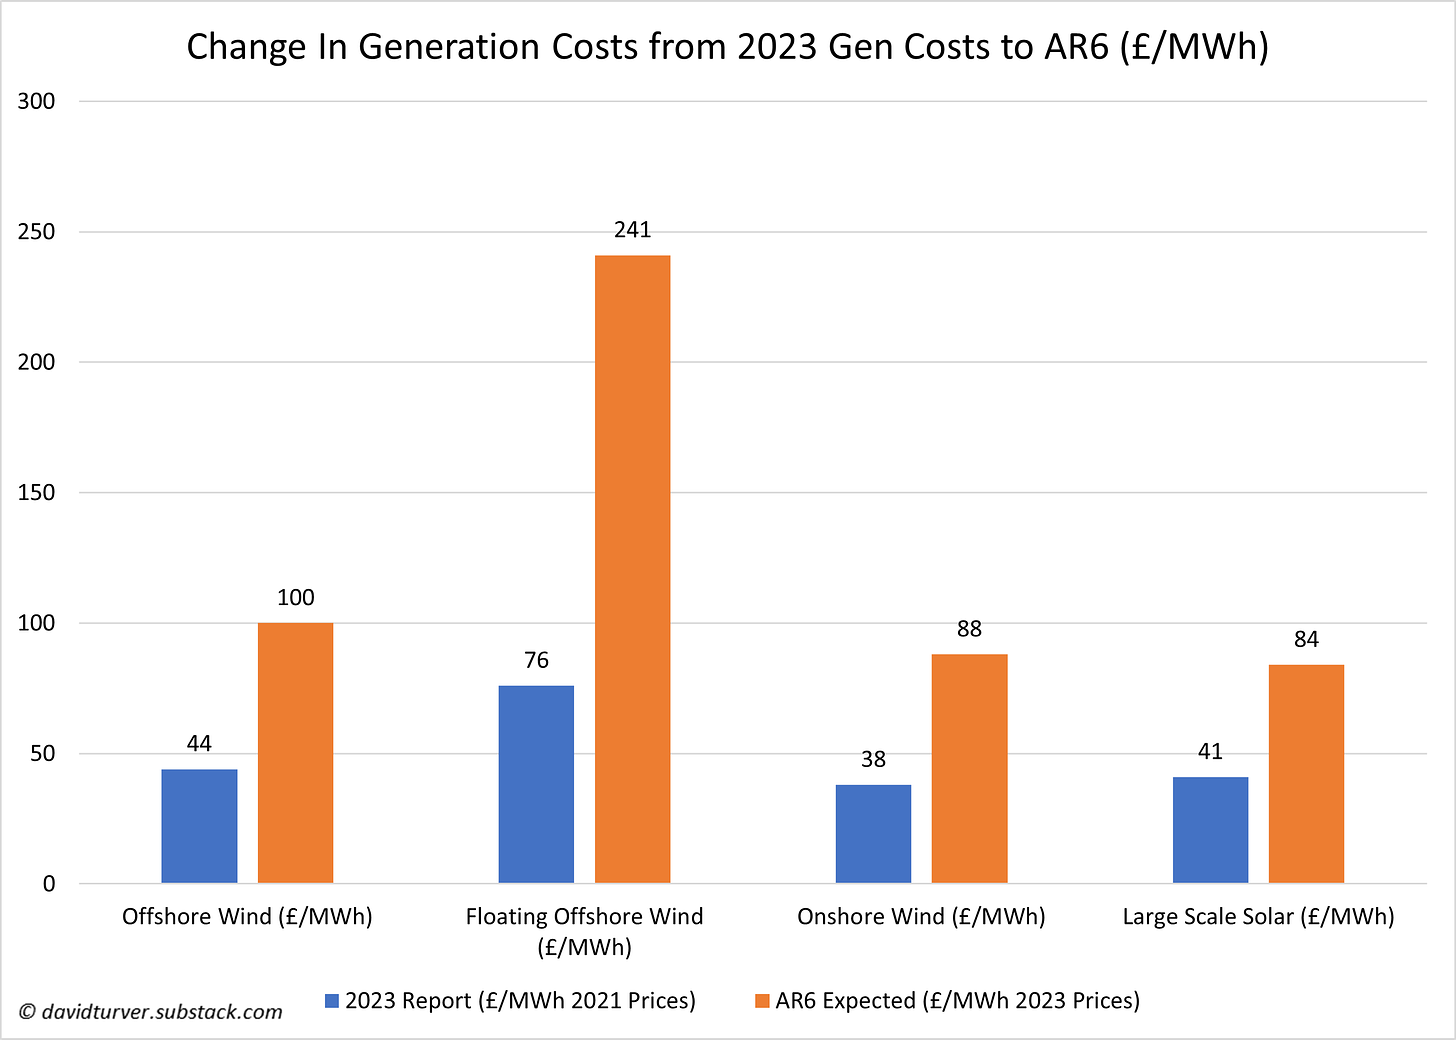 Figure 2 - Change in Renewable Generation Costs from 2023 Gen Costs Report to AR6 Expectations (£ per MWh)